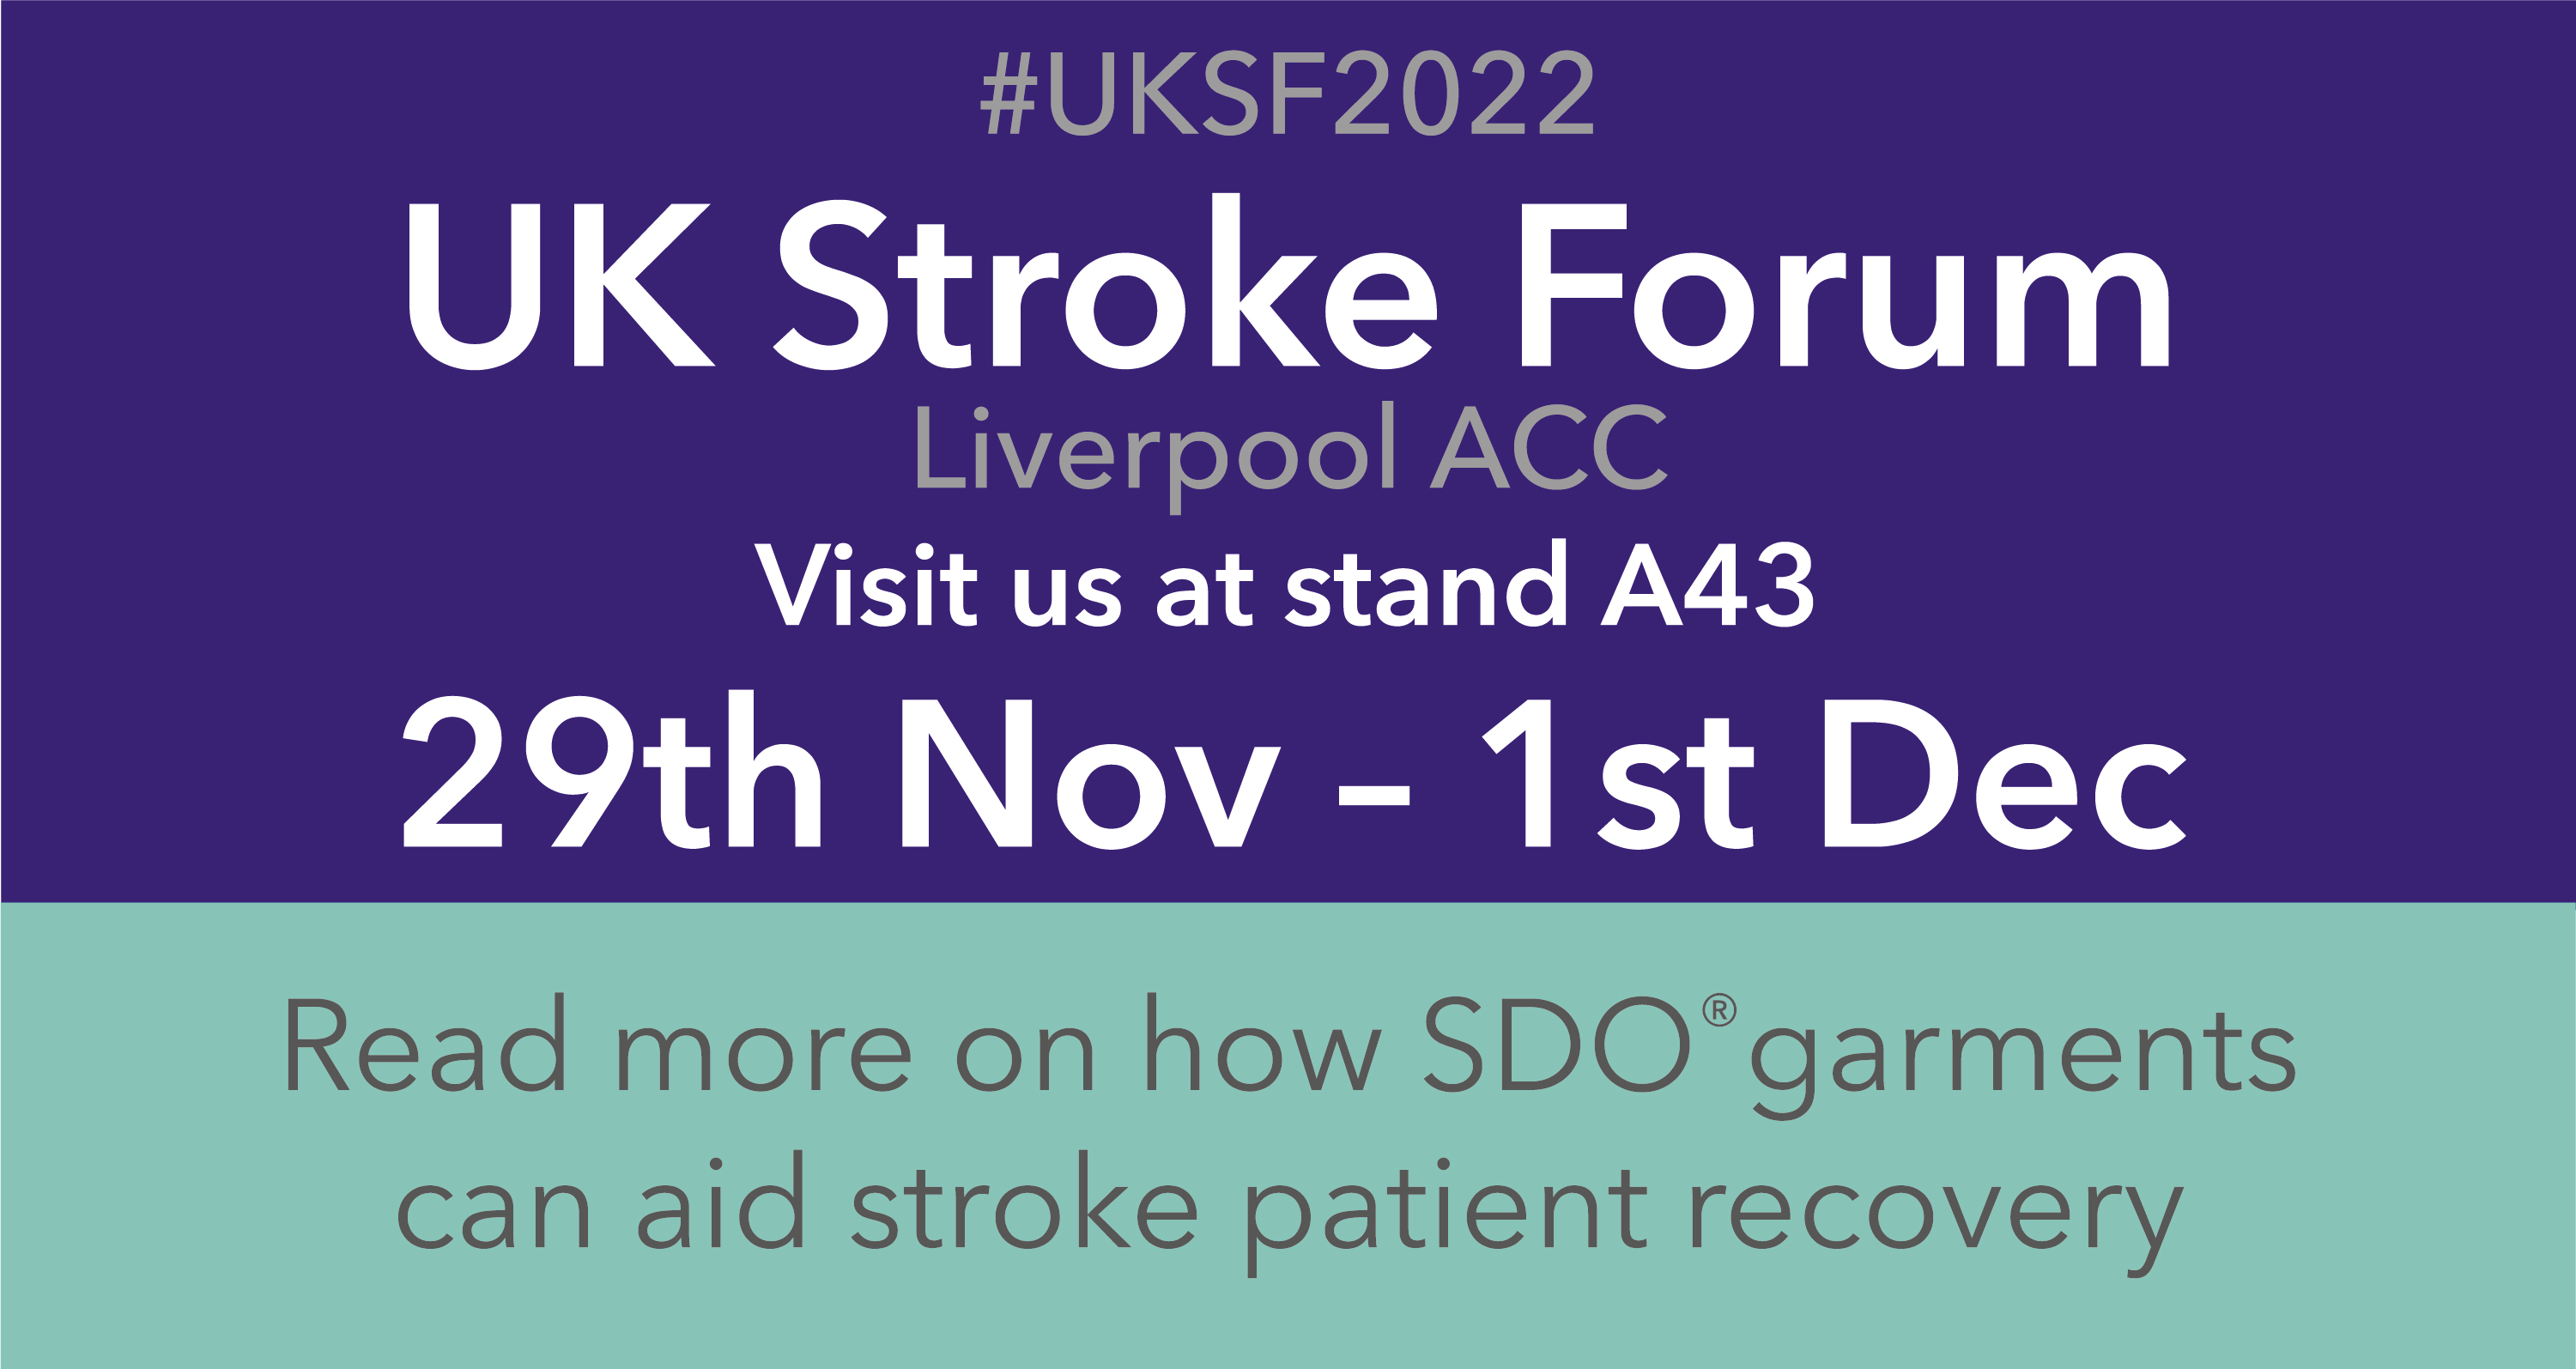 We are exhibiting at the UK Stroke Forum 2022